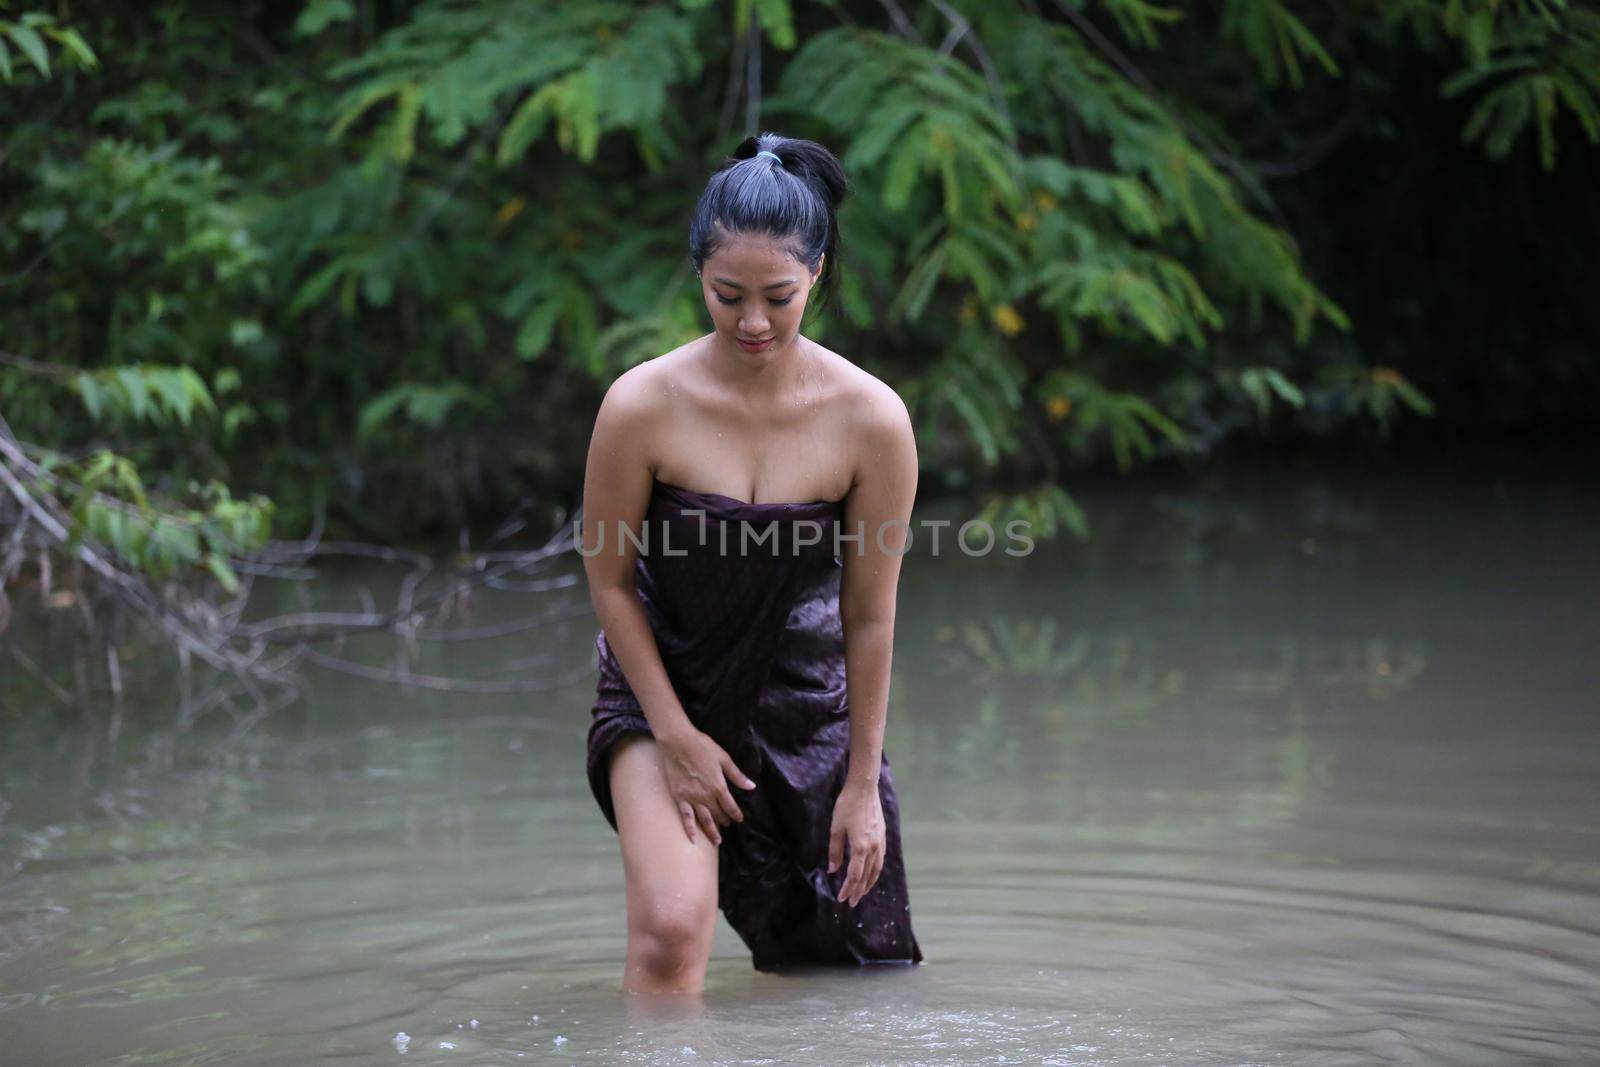 Rural Young Asian Women Bathing In A River, or Portrait Of Beautiful Young Asian Woman Bathing In The River. Asian sexy woman bathing in creek. 